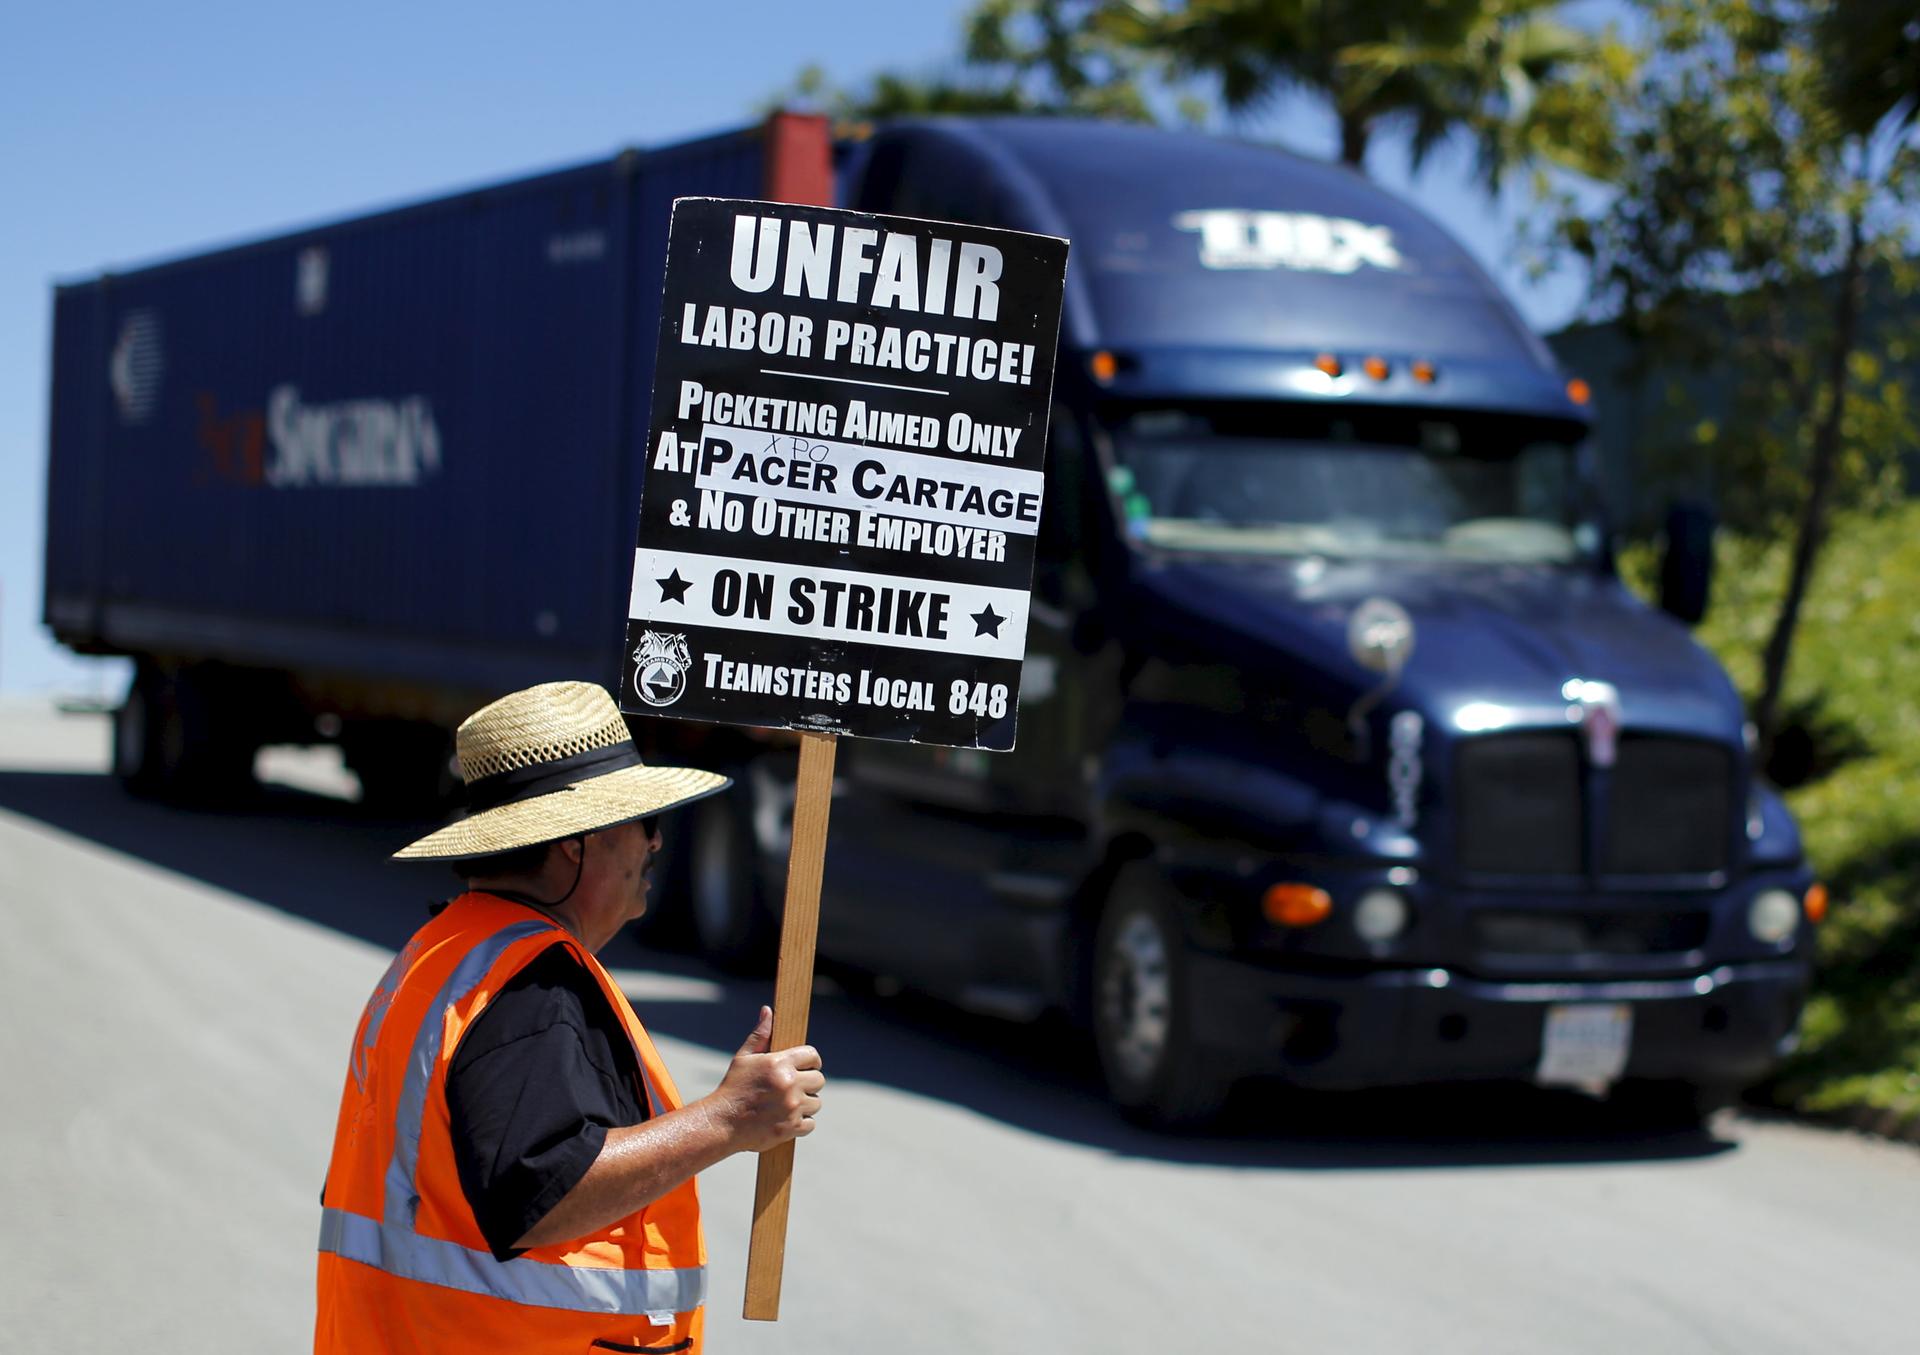 A man next to a truck stands in an orange vest with a sign that says 